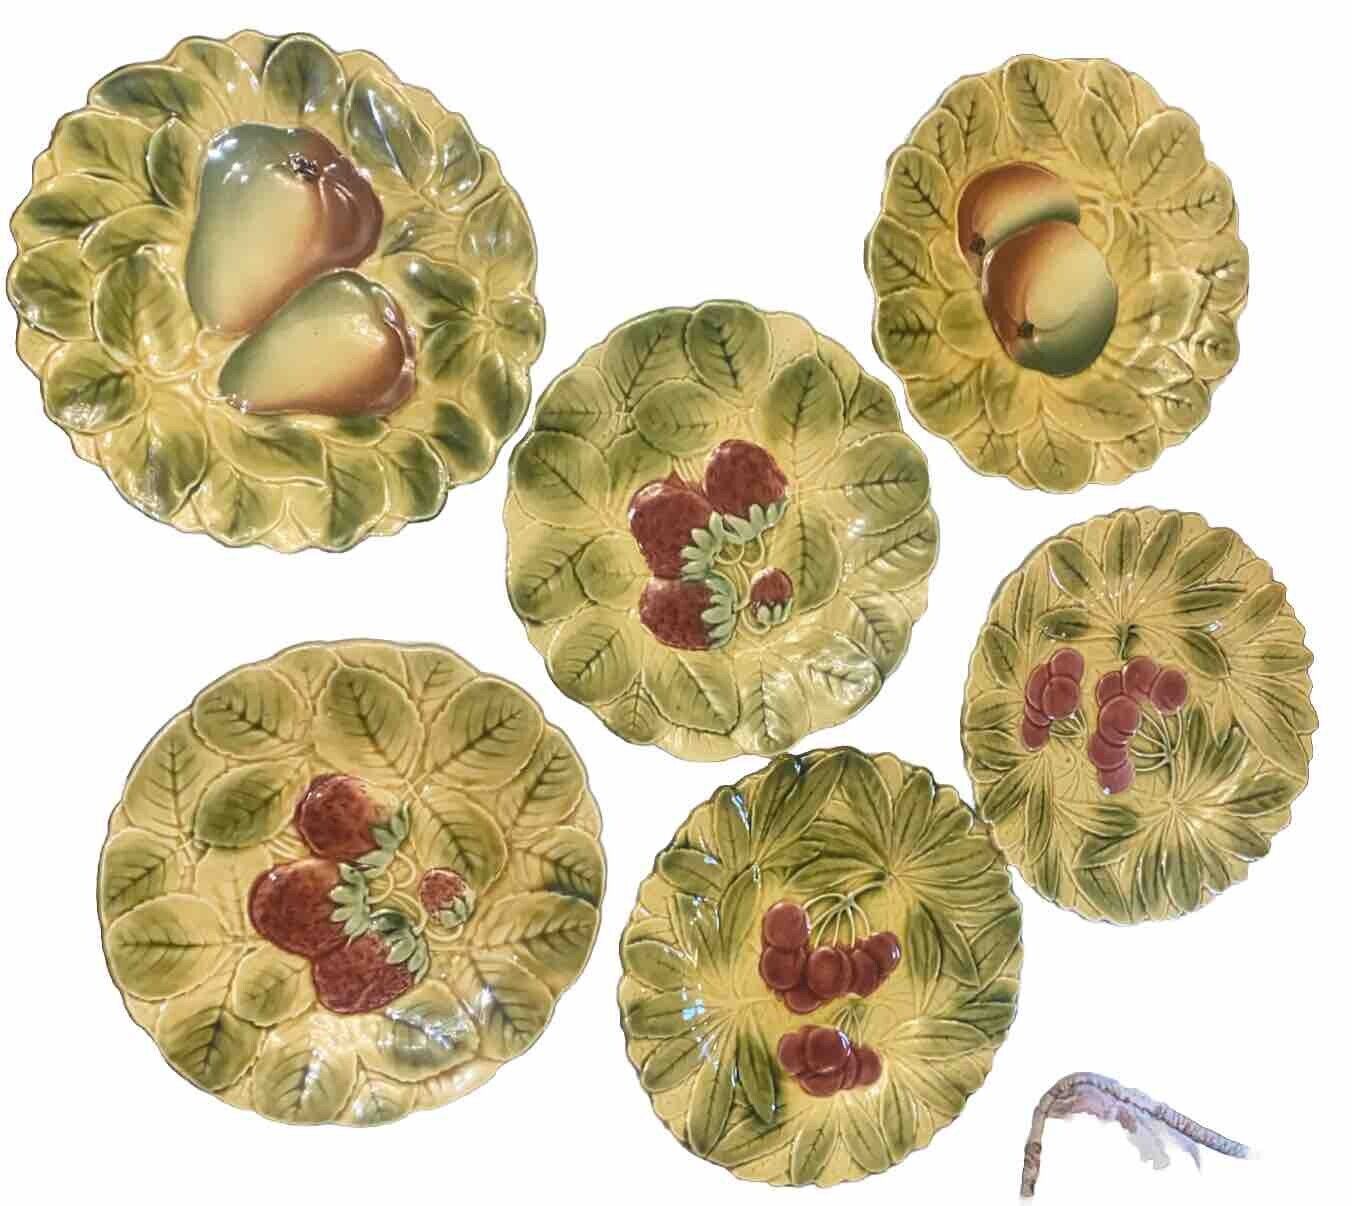 Vintage 1940s French Faience Fruit Majolica Plates By Sarreguemines Set Of 6